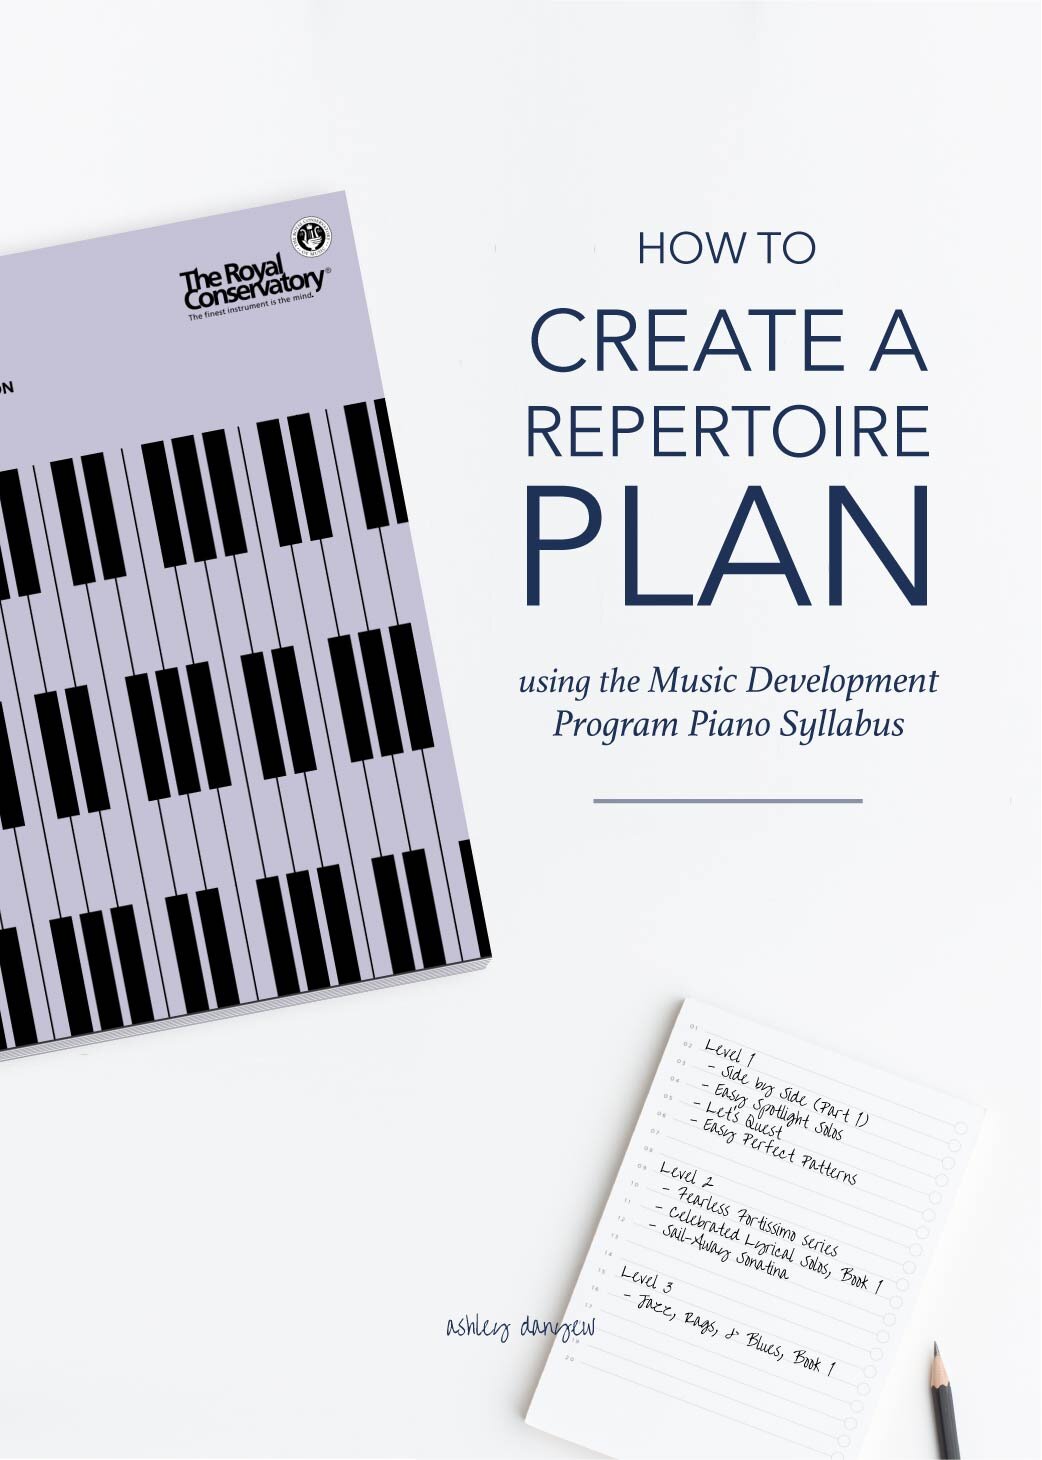 How to Create a Repertoire Plan Using the Music Development Program Piano Syllabus